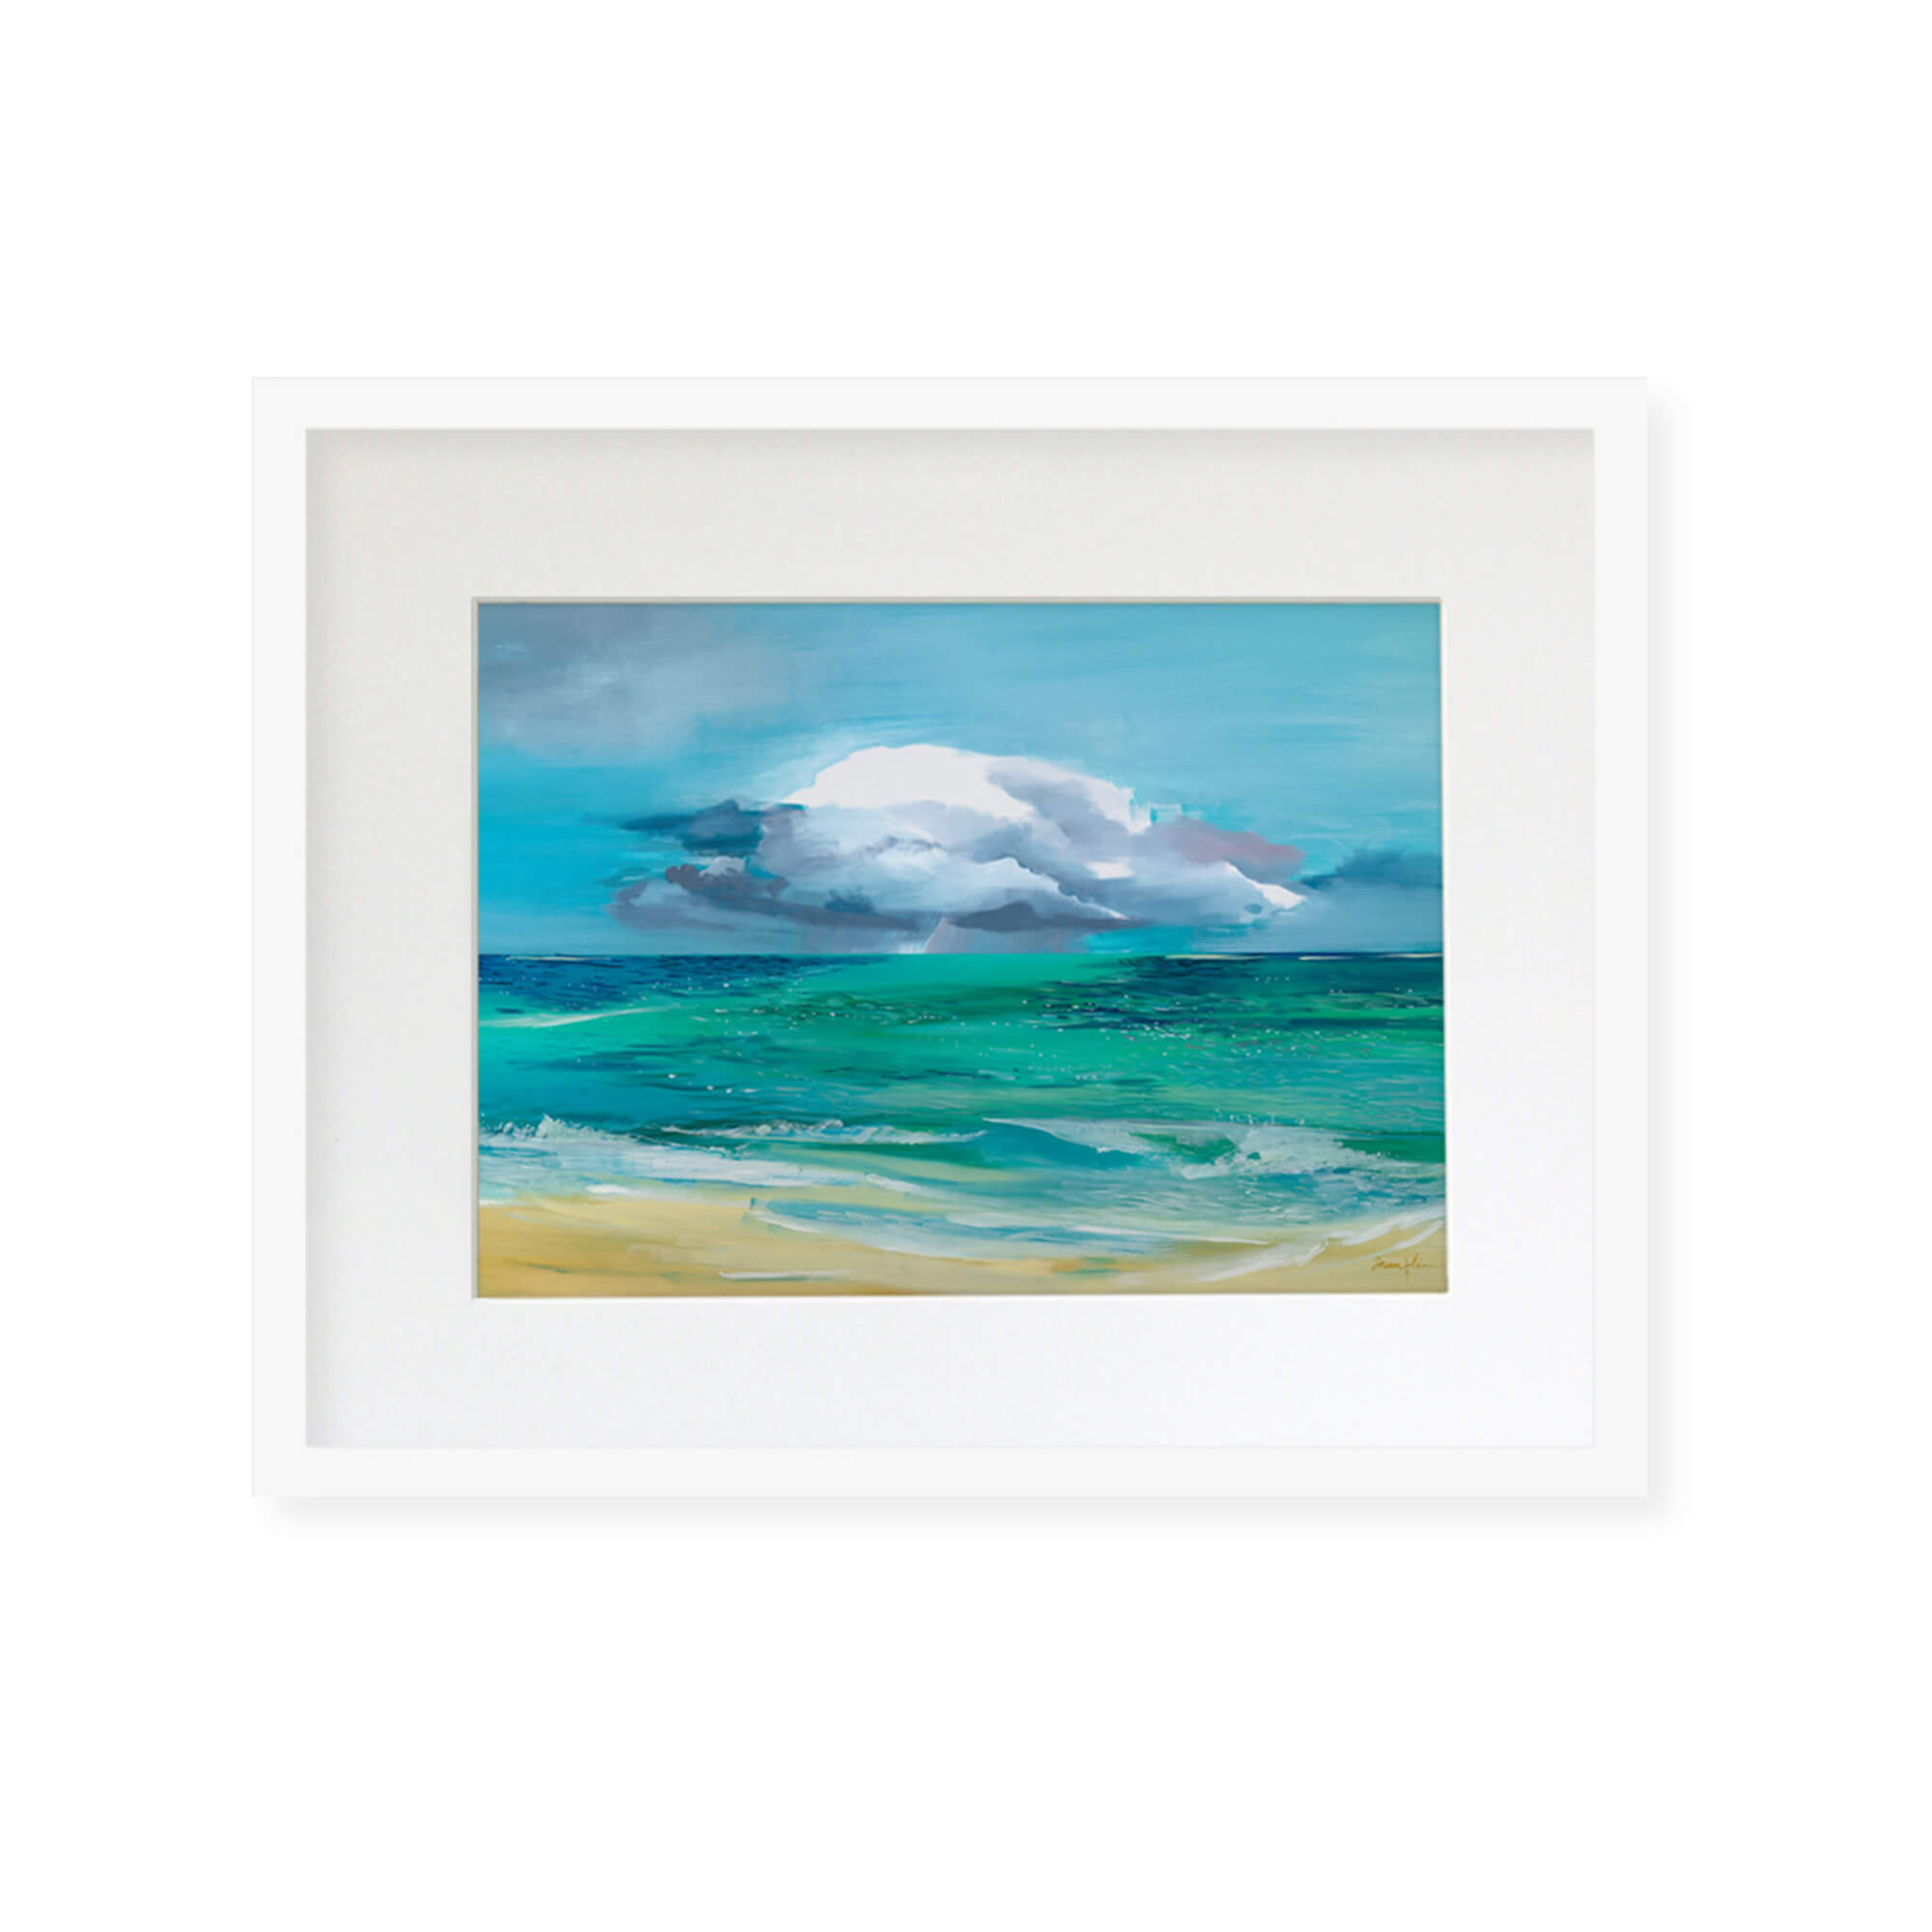 Framed matted art print depicting calm tranquil waters leading to a beach oasis by Hawaii artist Saumolia Puapuaga